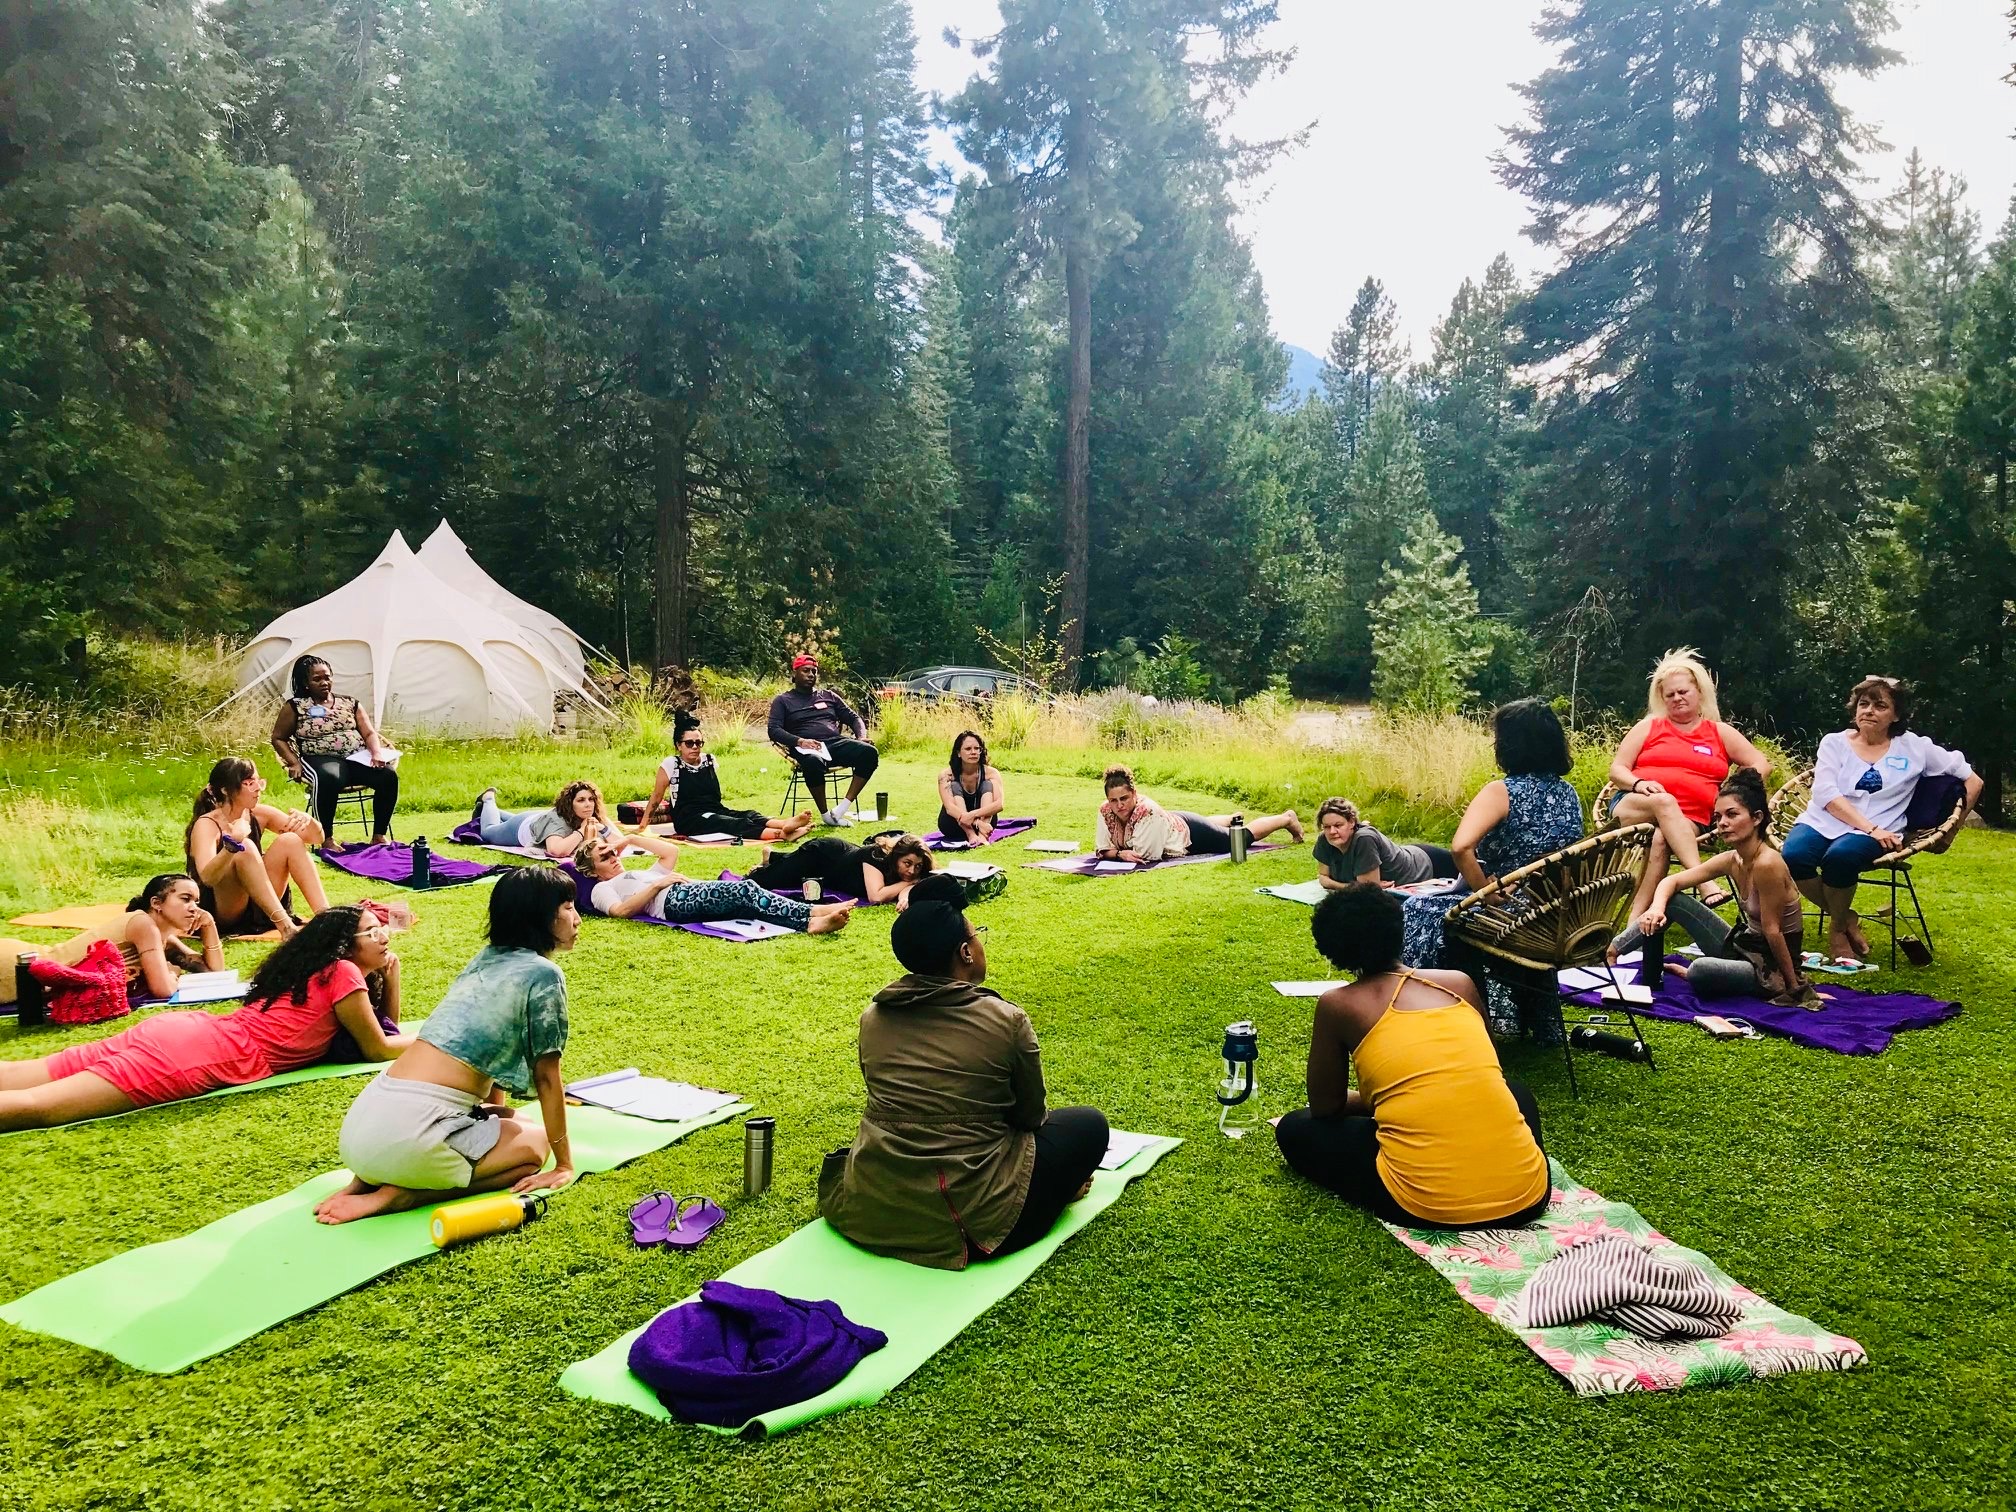 Mt Shasta – Live Reunion For A.U.R.A. Hypnosis Practitioners